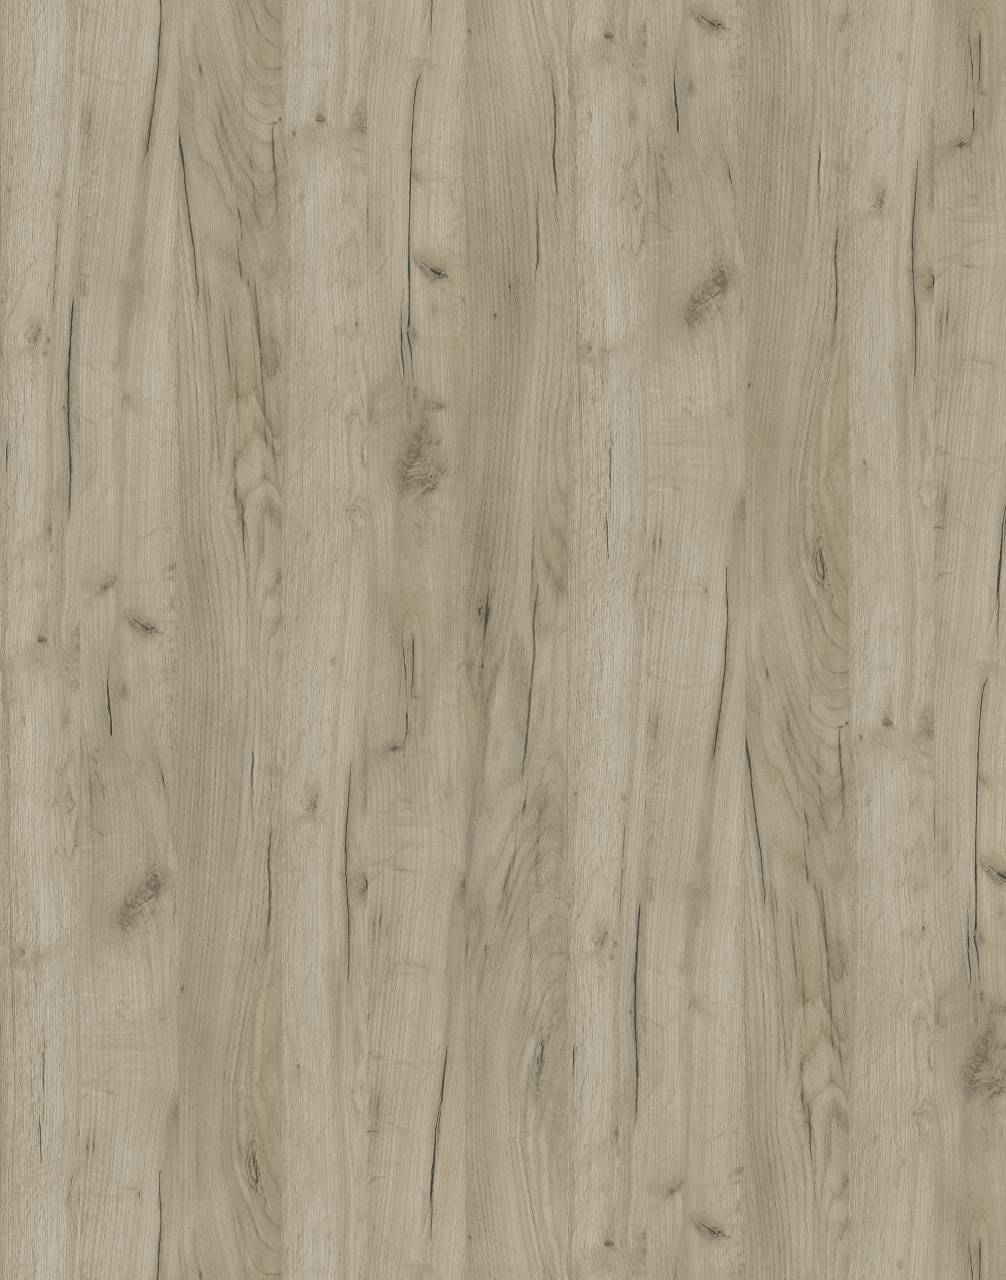 Graft Oak PW HPL with smooth surface and warm brown tones for a natural and timeless look.